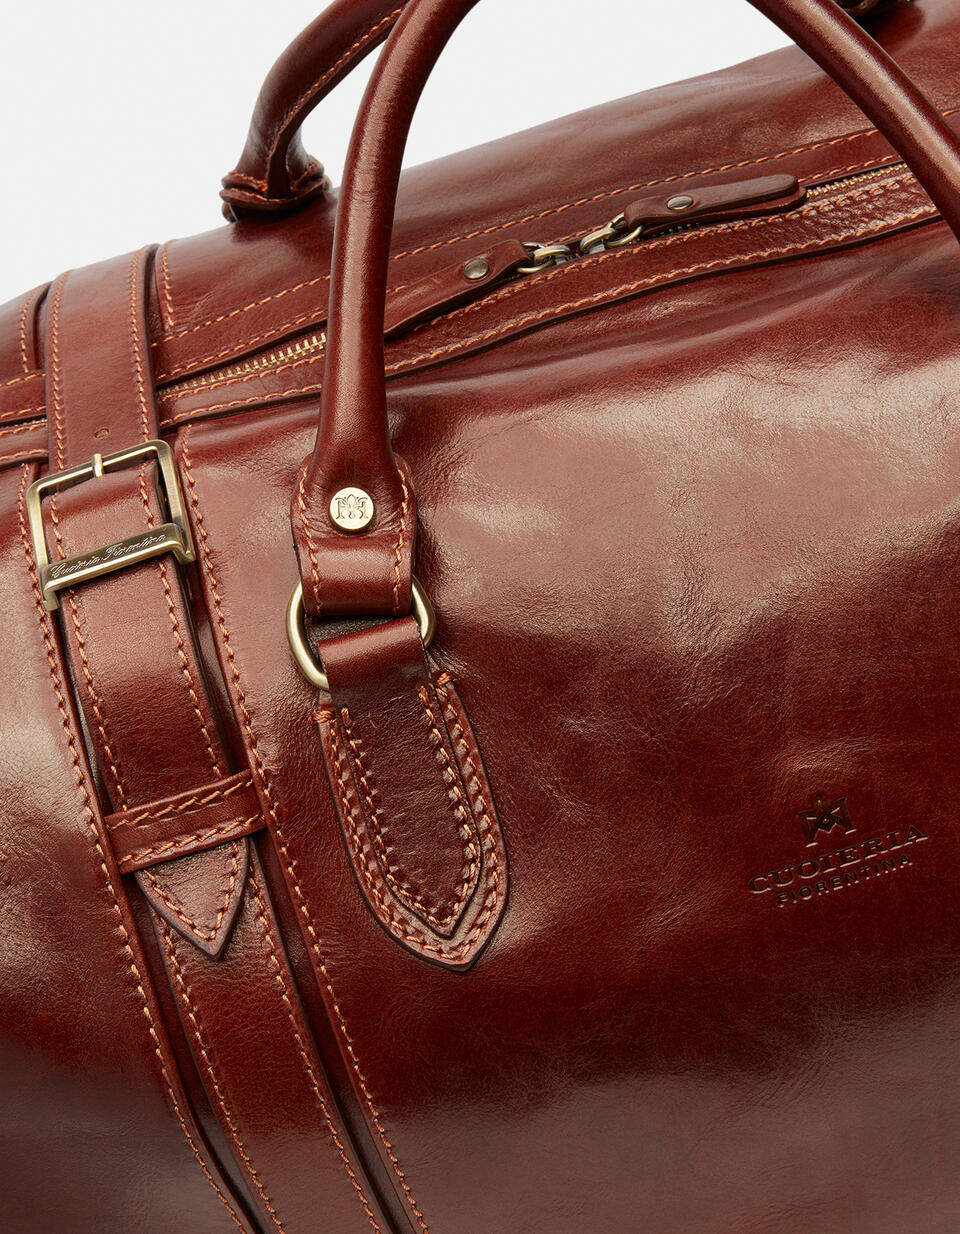 Leather travel bag with two handles - Luggage | TRAVEL BAGS  - Luggage | TRAVEL BAGSCuoieria Fiorentina